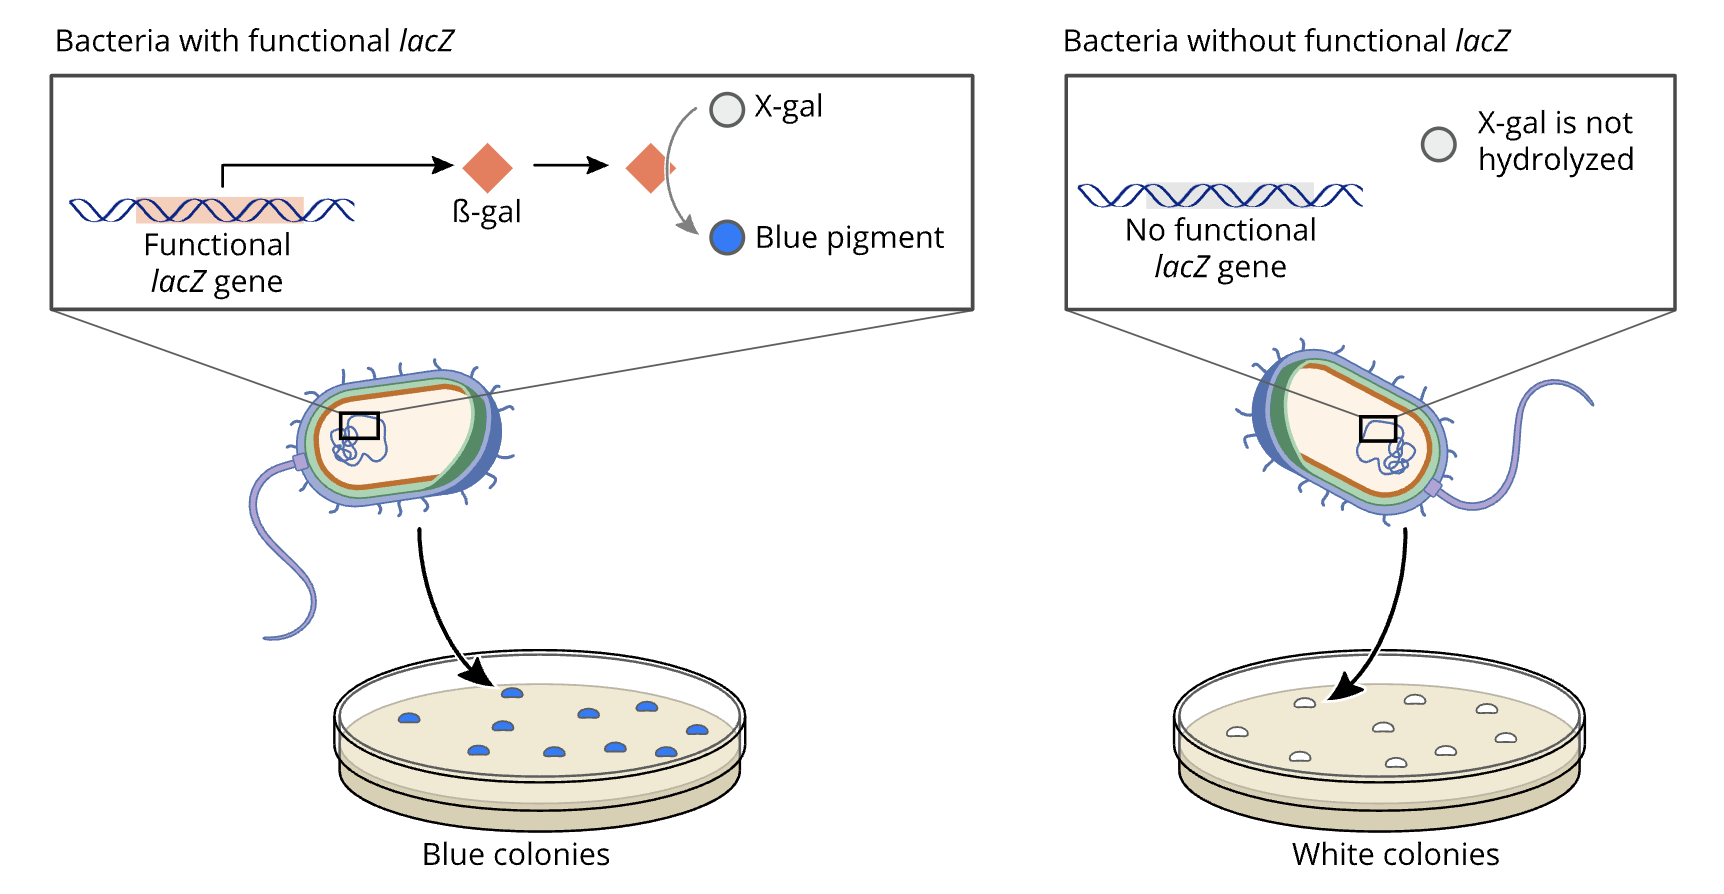 A diagram showing how disrupting the function of the lacZ gene results in white bacterial colonies, rather than blue, because X-gal is not hydrolyzed.